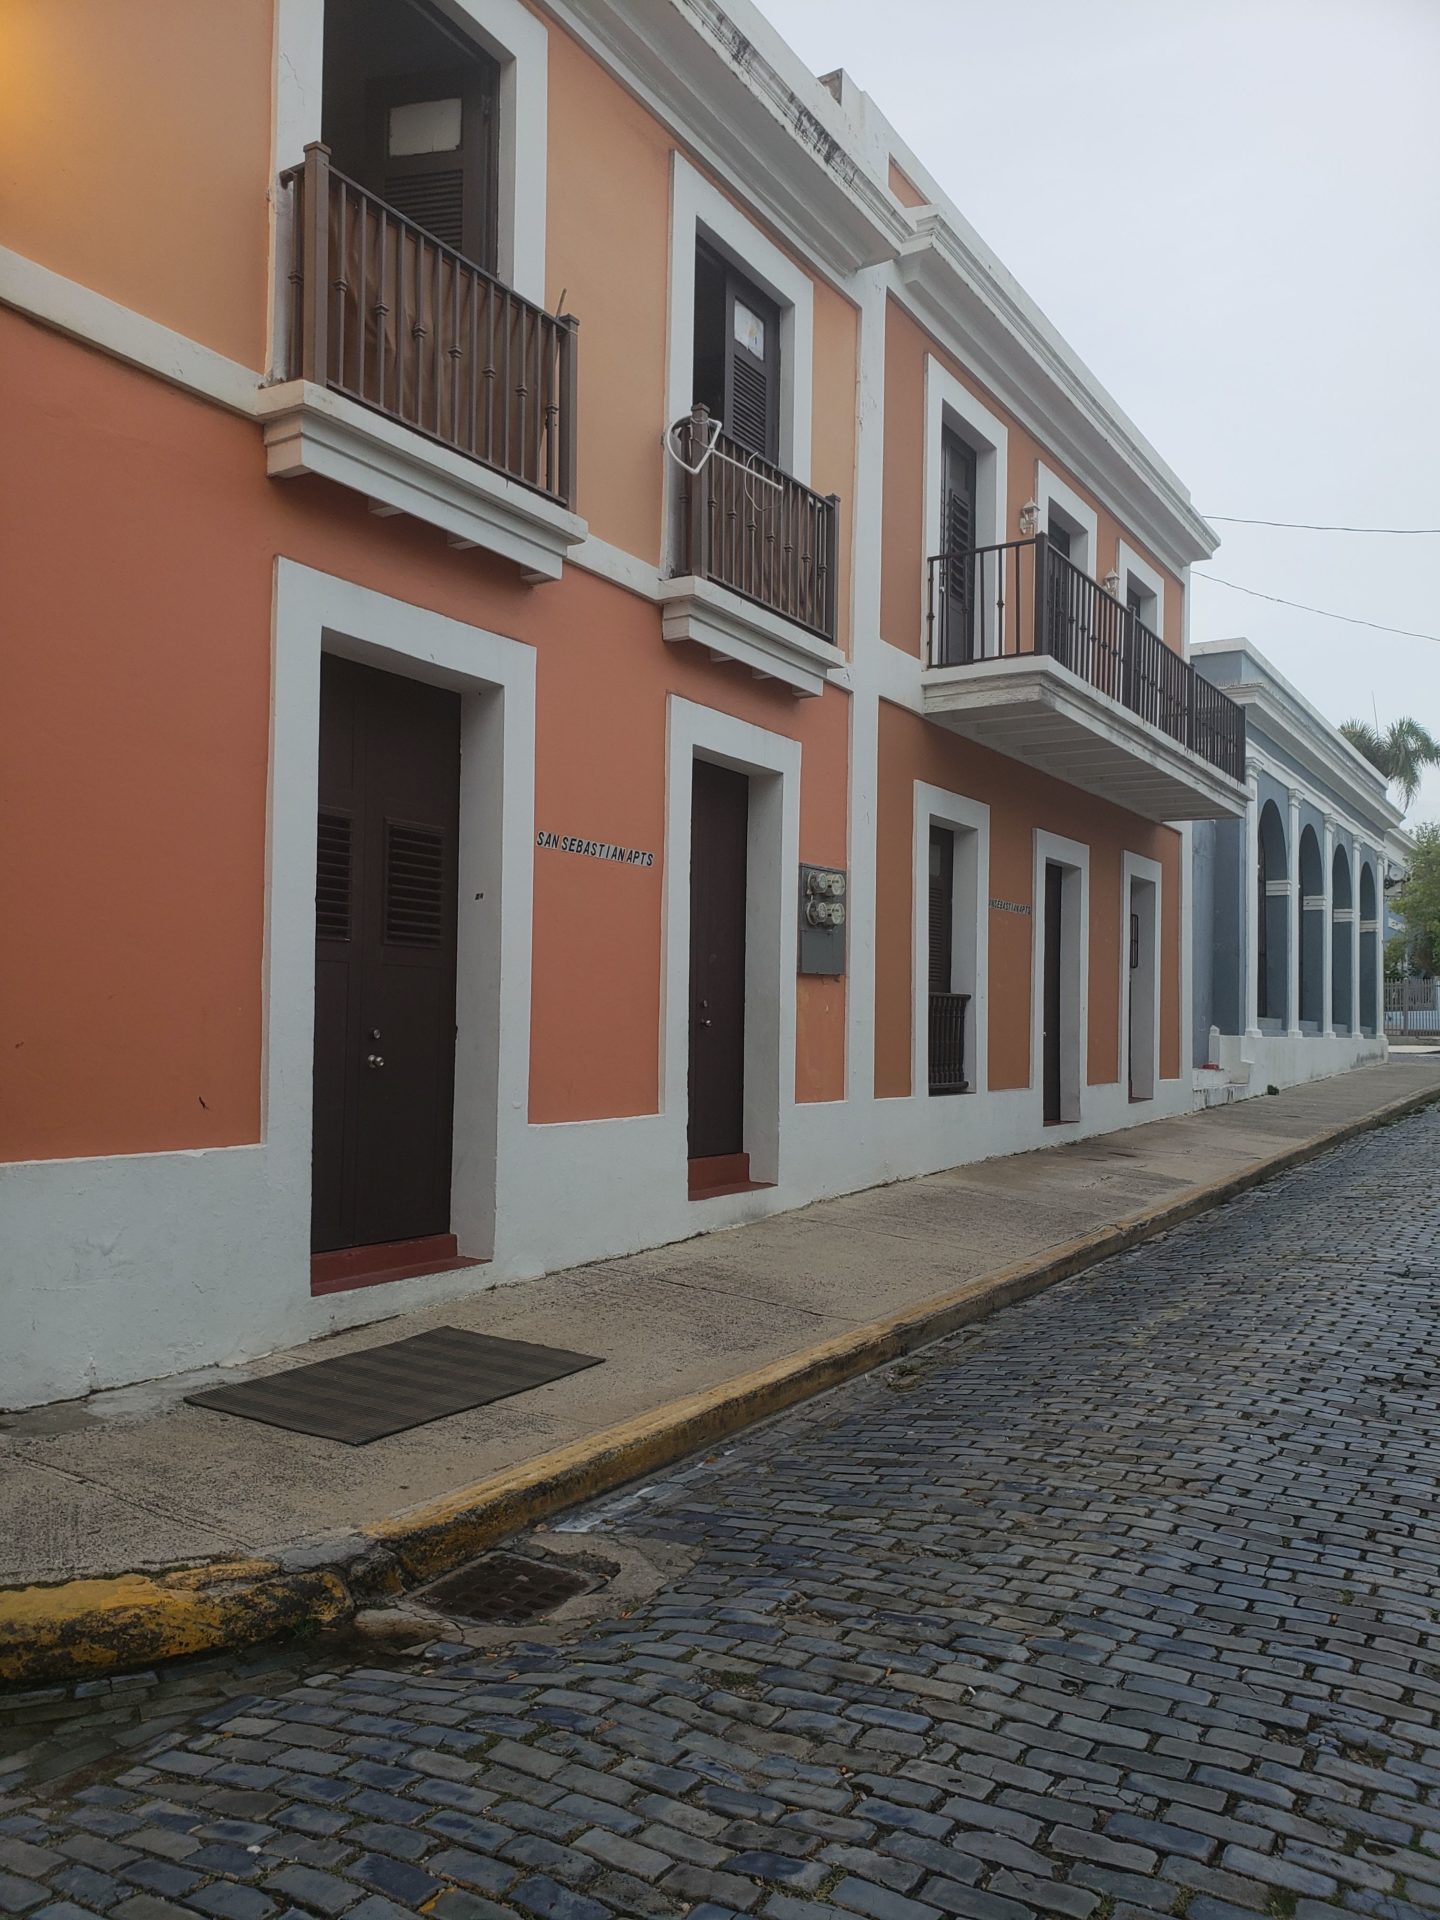 a street with a row of buildings